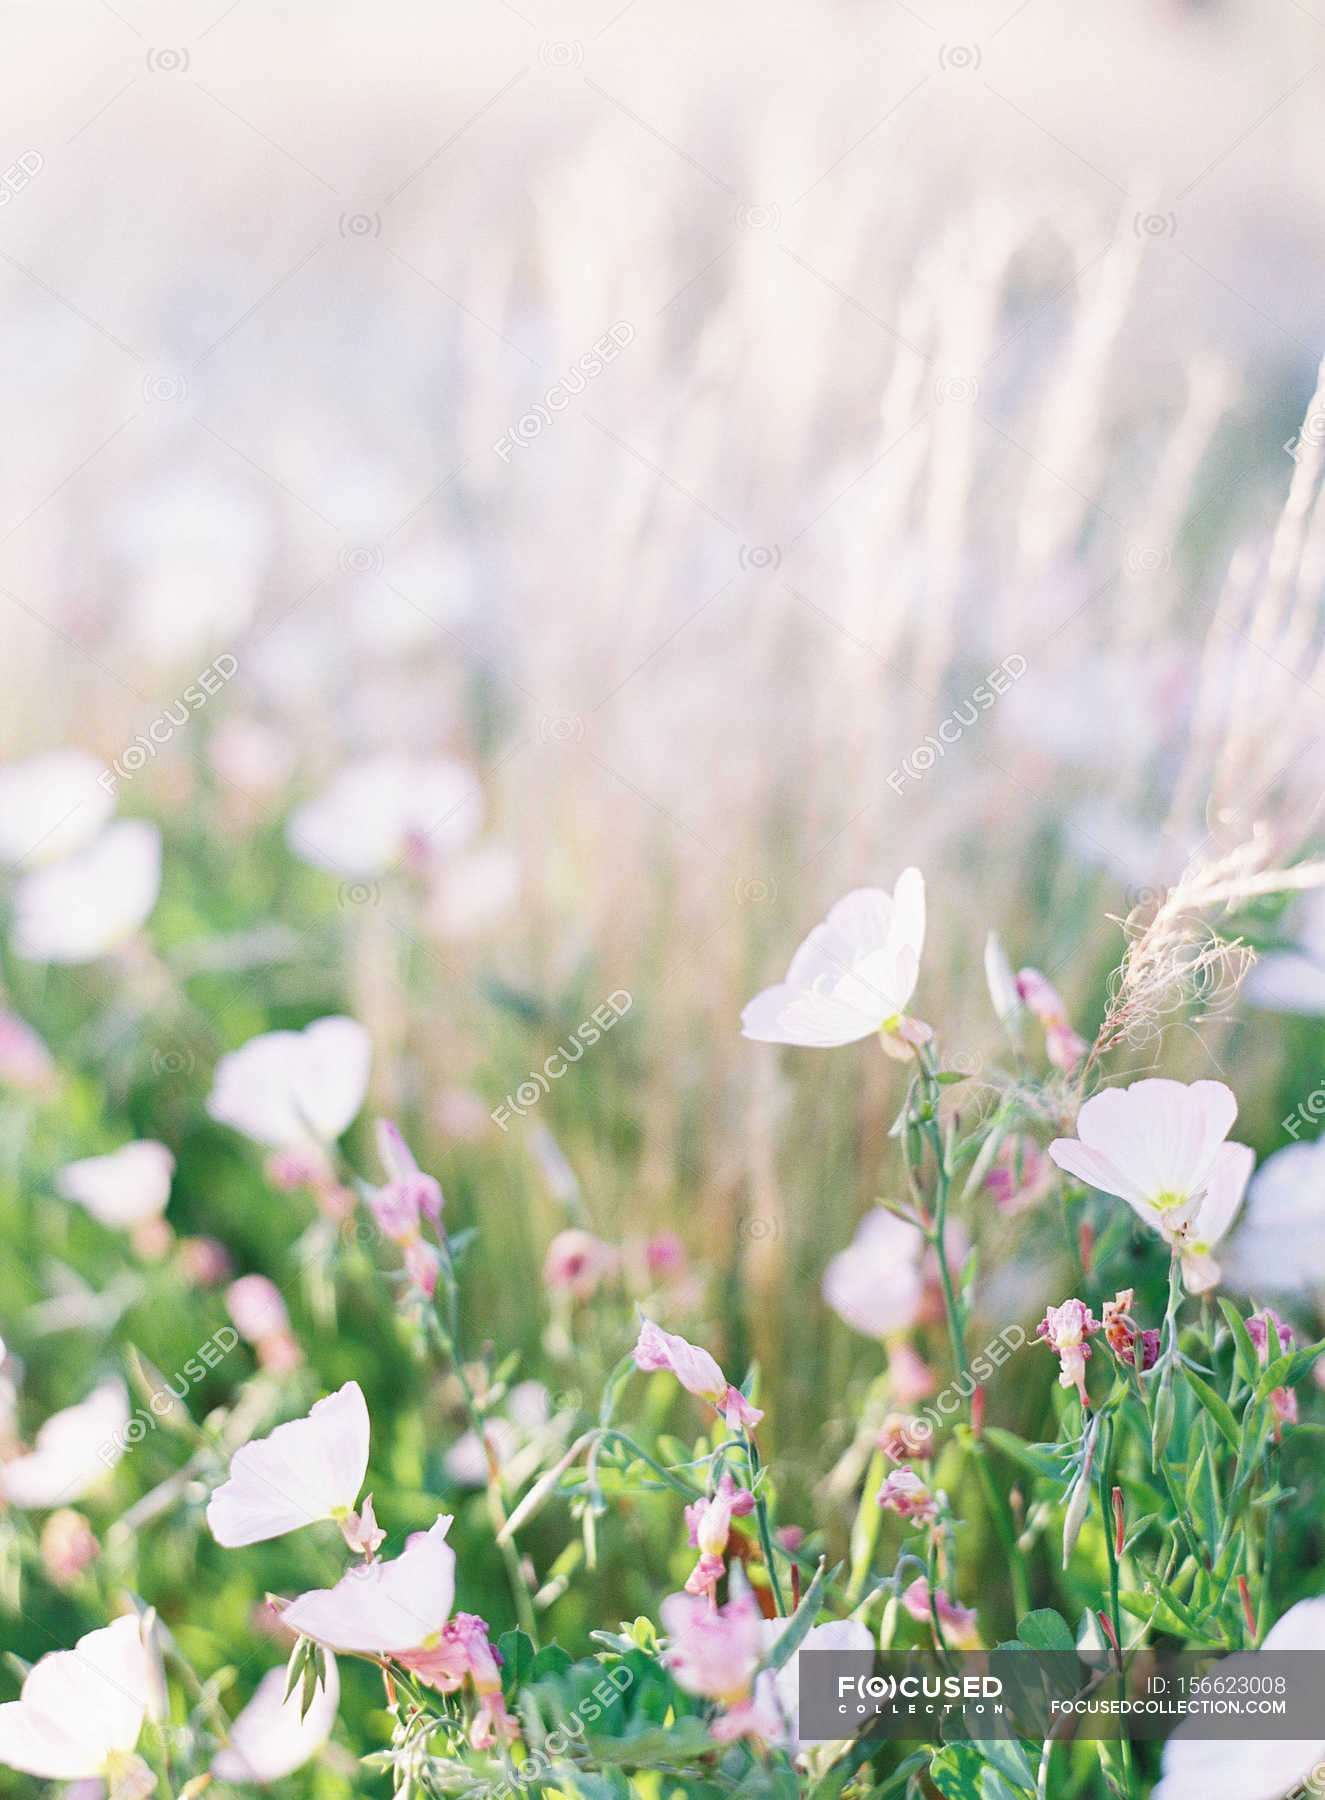 Rustic summer flowers — blooming, selective focus - Stock Photo ...